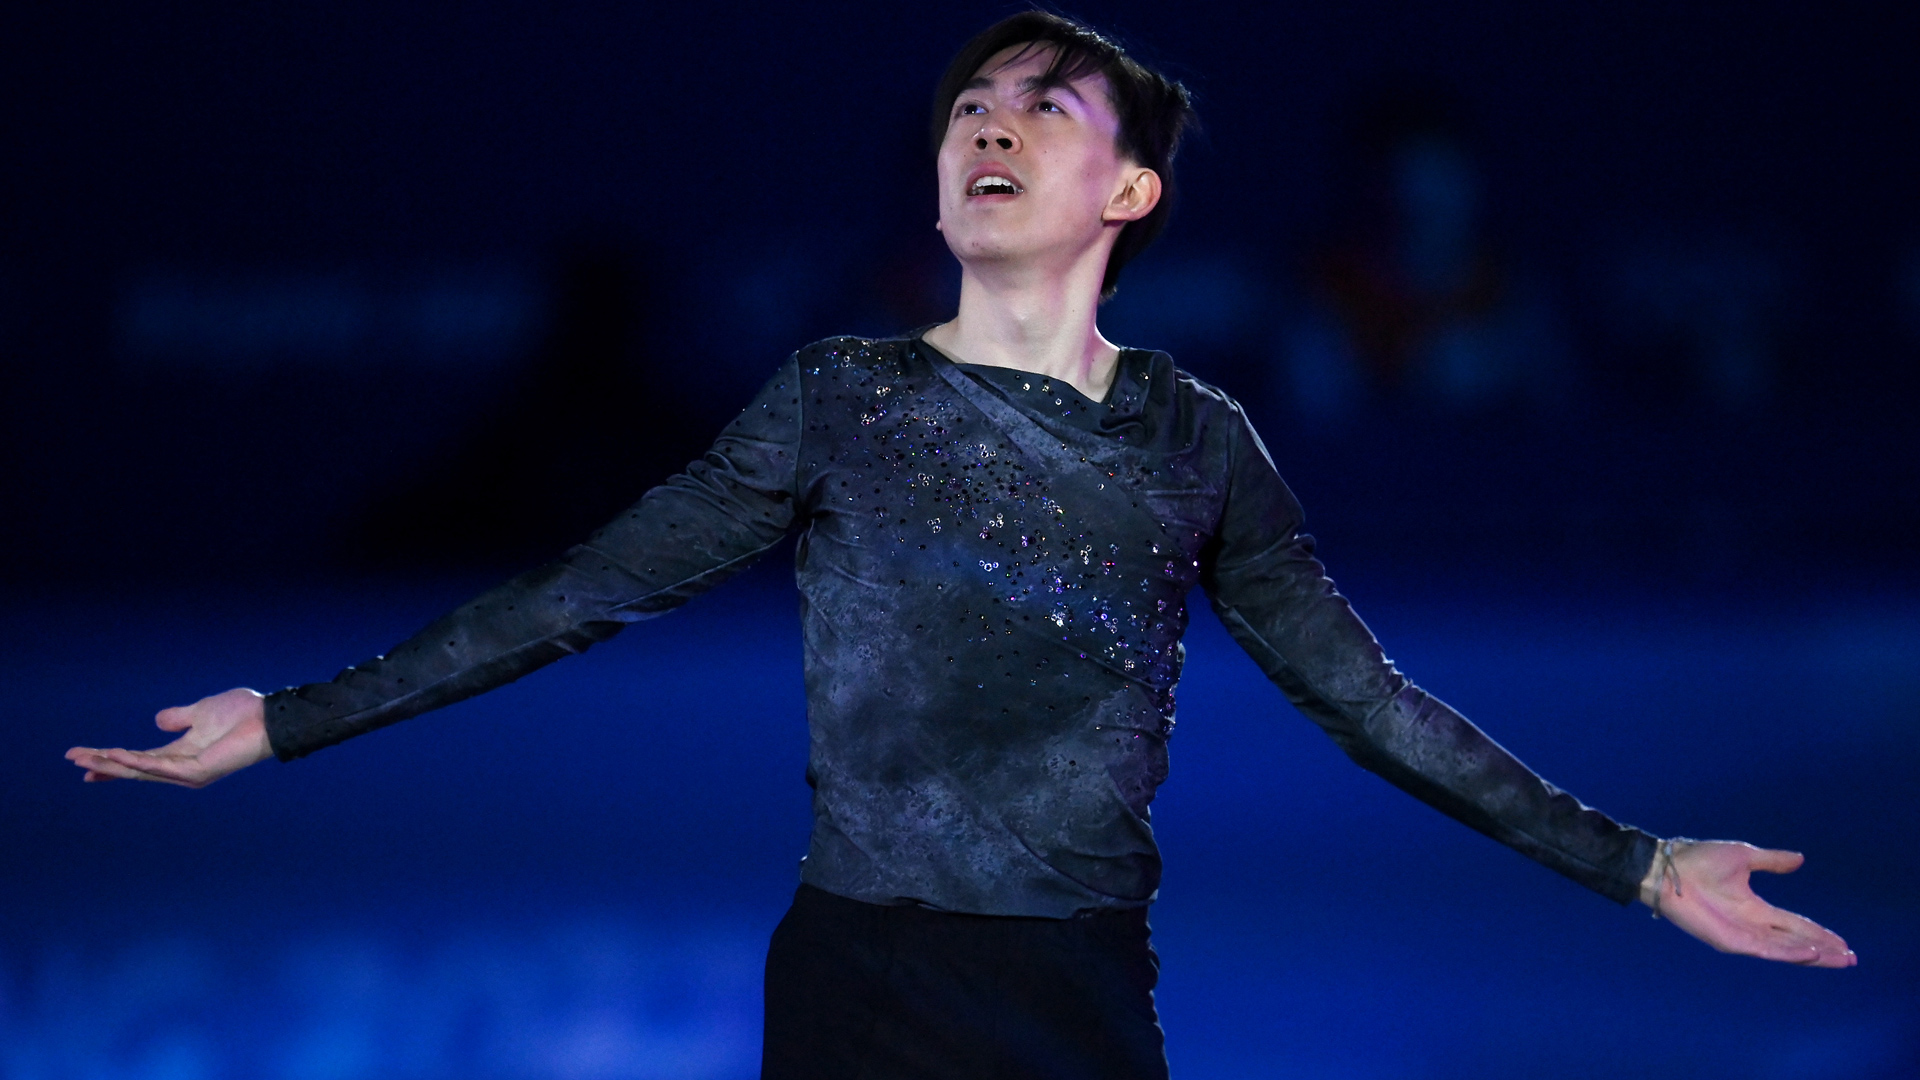 Vincent Zhou Makes Return to Ice in Olympic Exhibition Gala